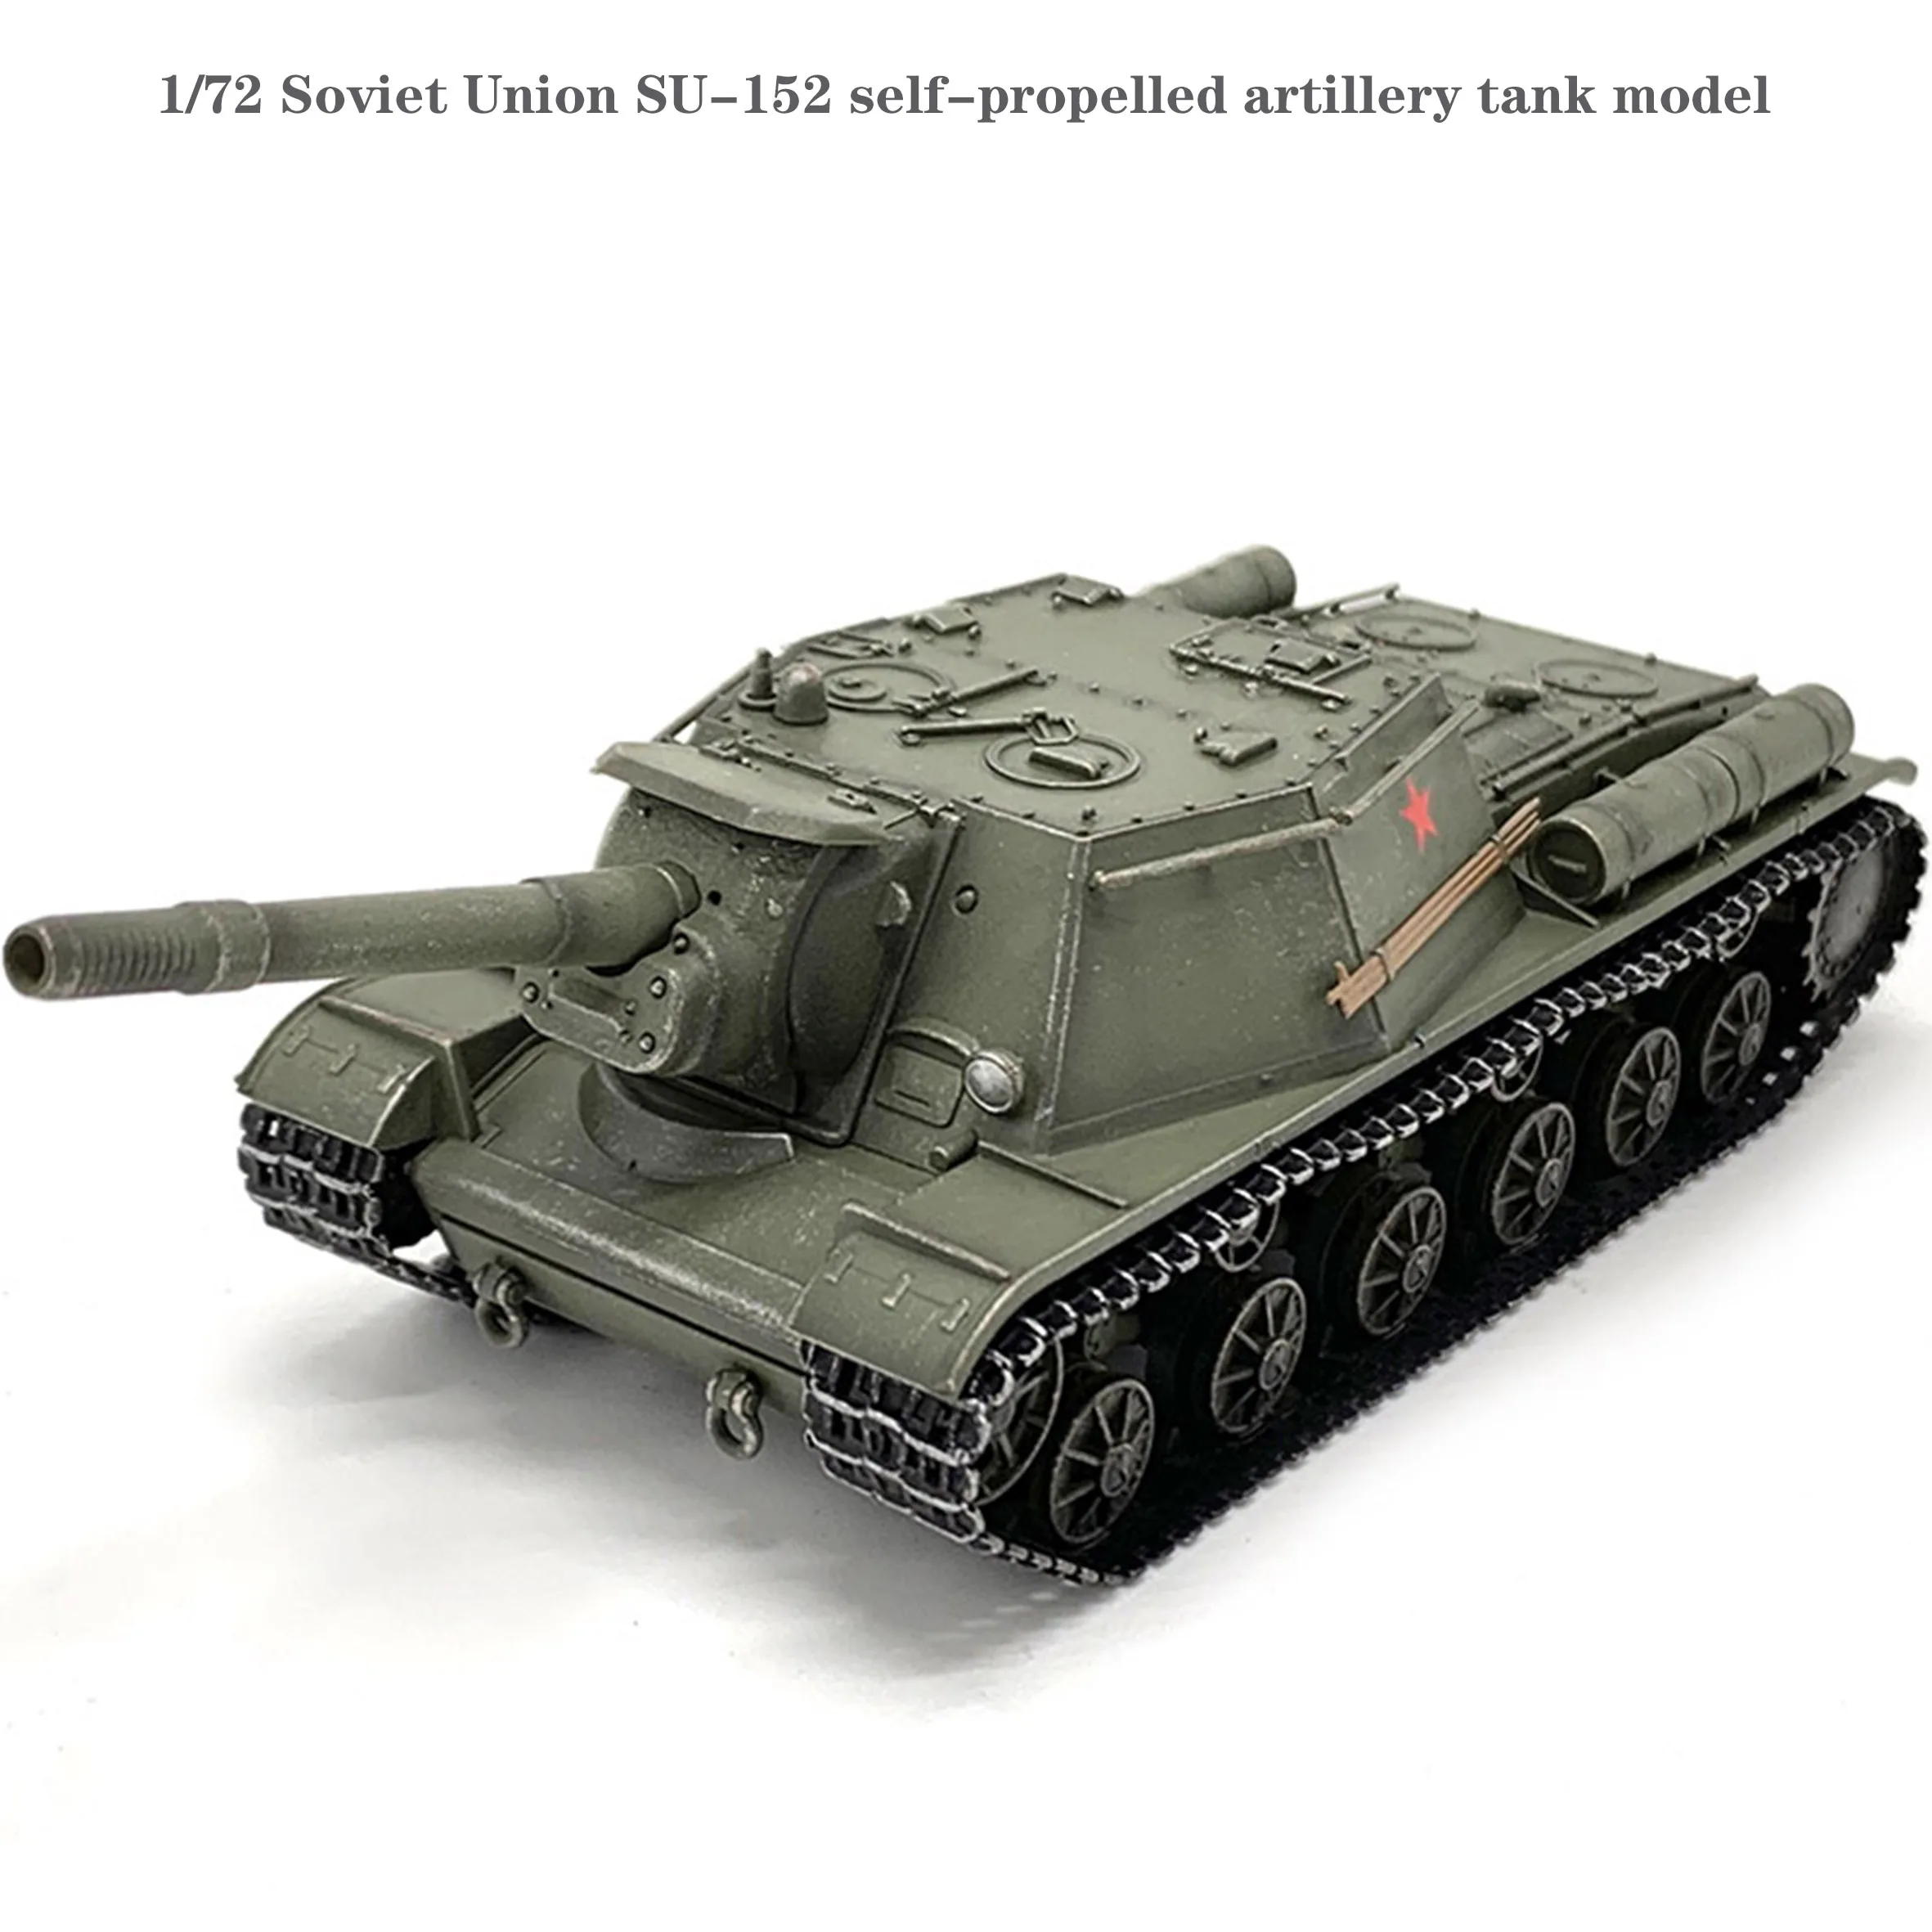 

DW7210 1/72 Soviet Union SU-152 self-propelled artillery tank model Finished product collection model